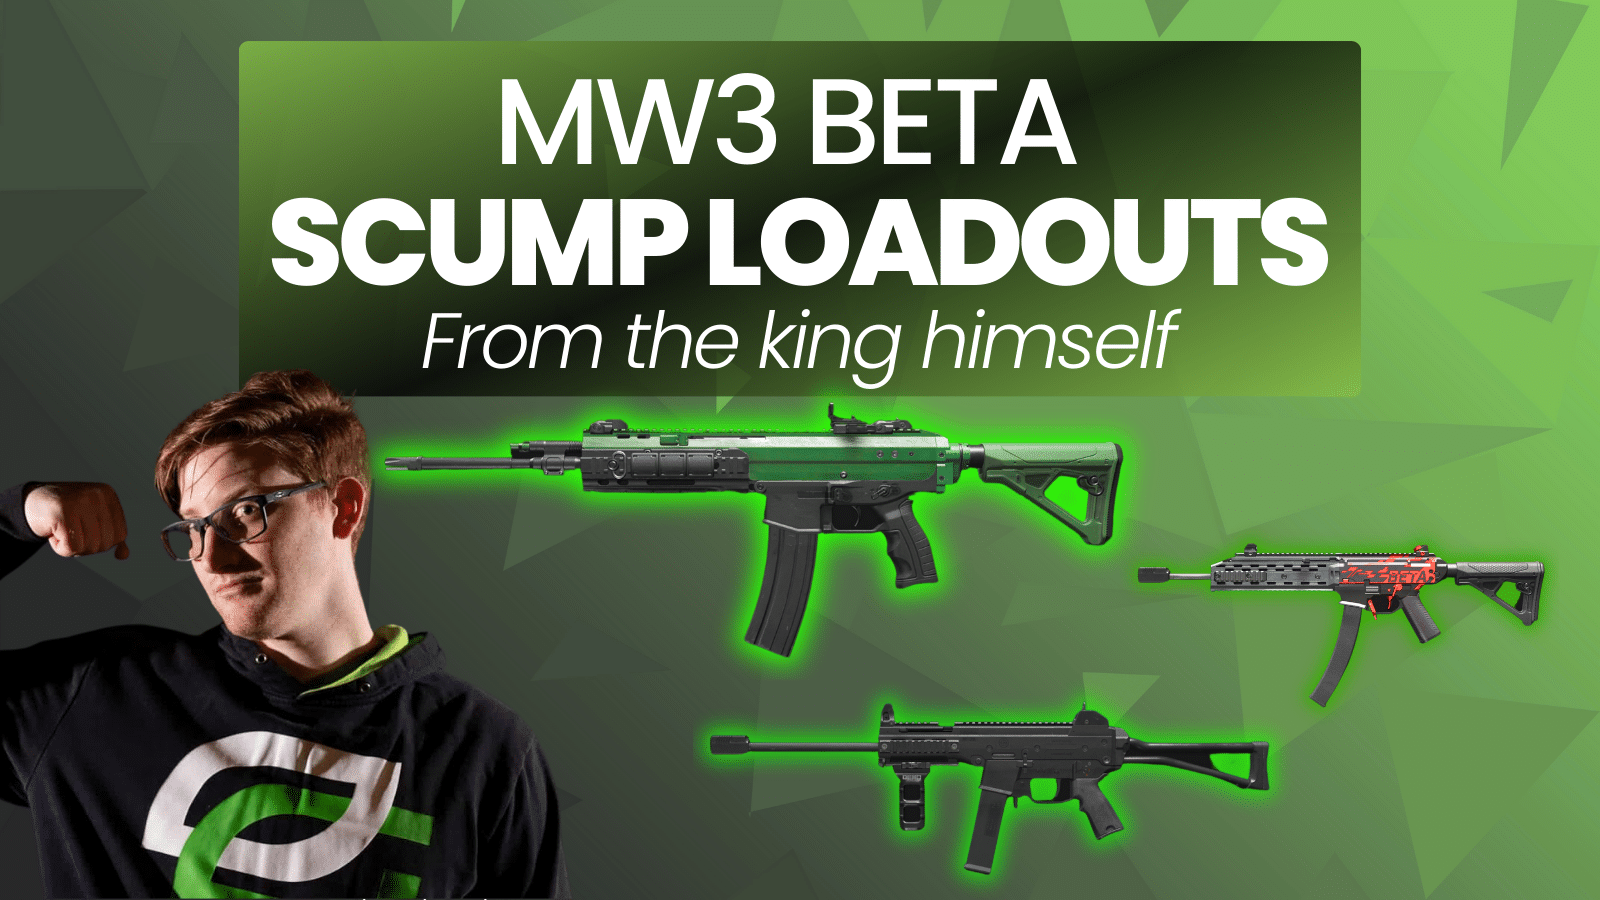 Best Meta Loadouts for MW3 Beta Multiplayer by The King of COD Scump